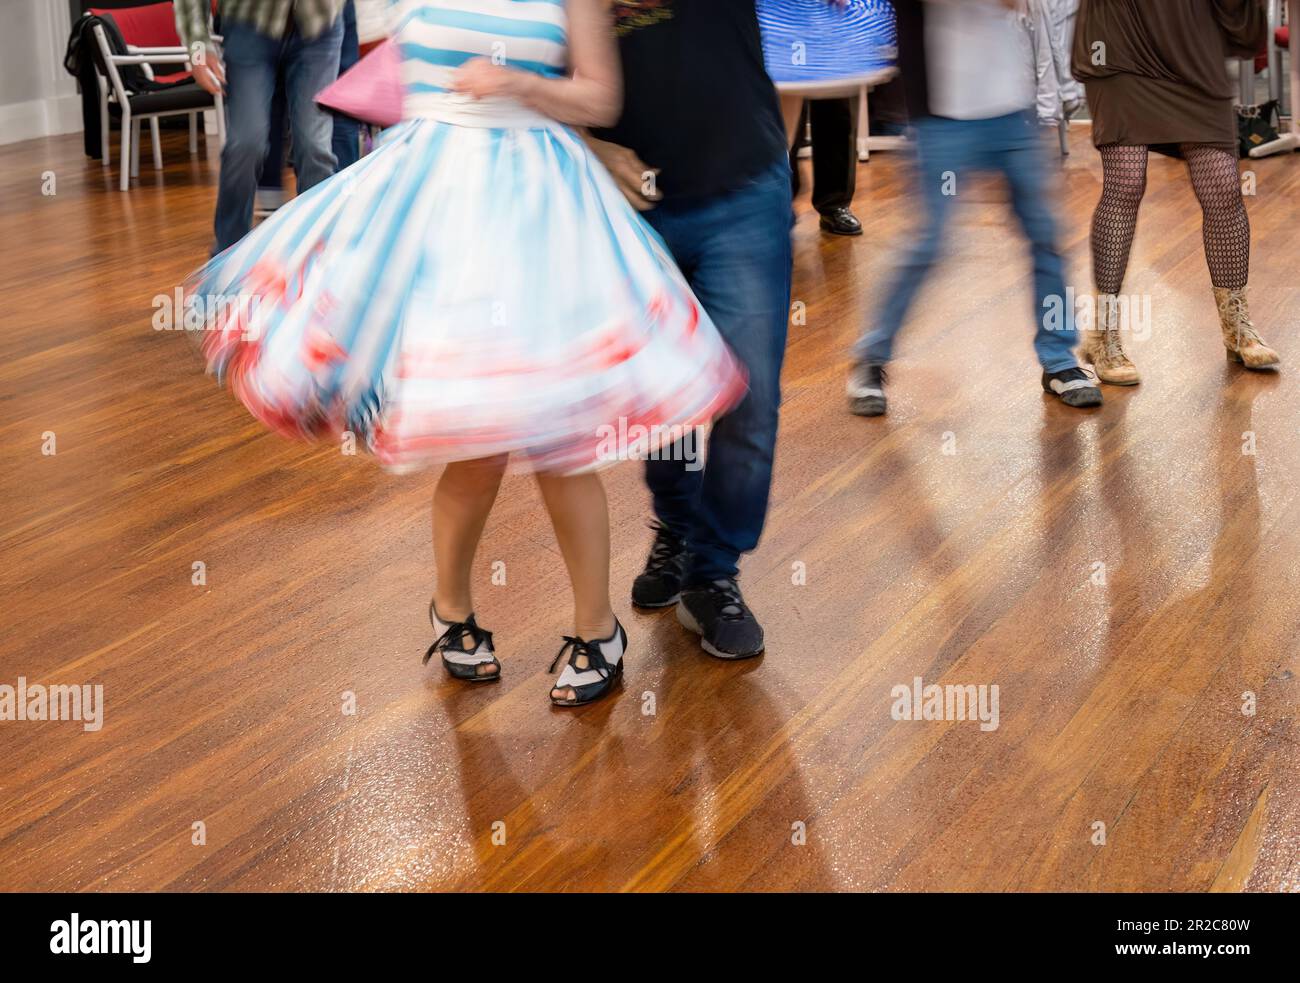 People enjoying dancing at a dance club. Motion blur of beautiful flying skirt captured in camera by using slow shutter speed. Stock Photo